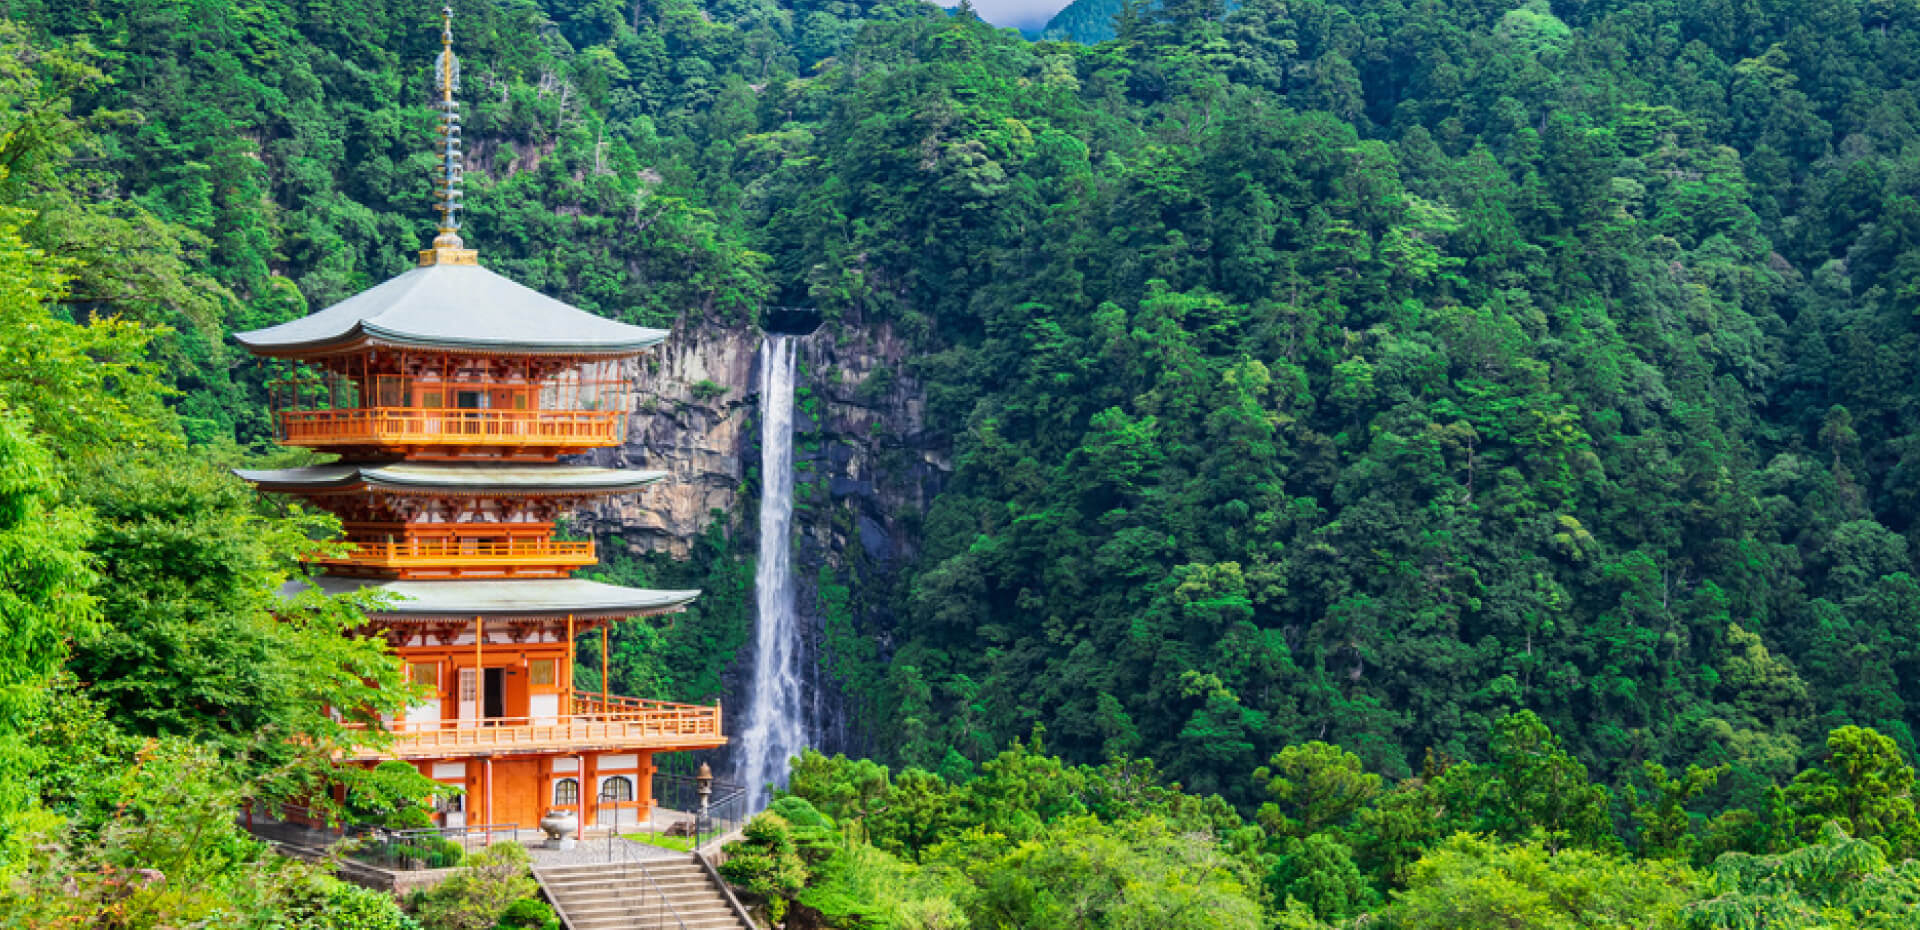 The official Wakayama Travel Guide 简体中文